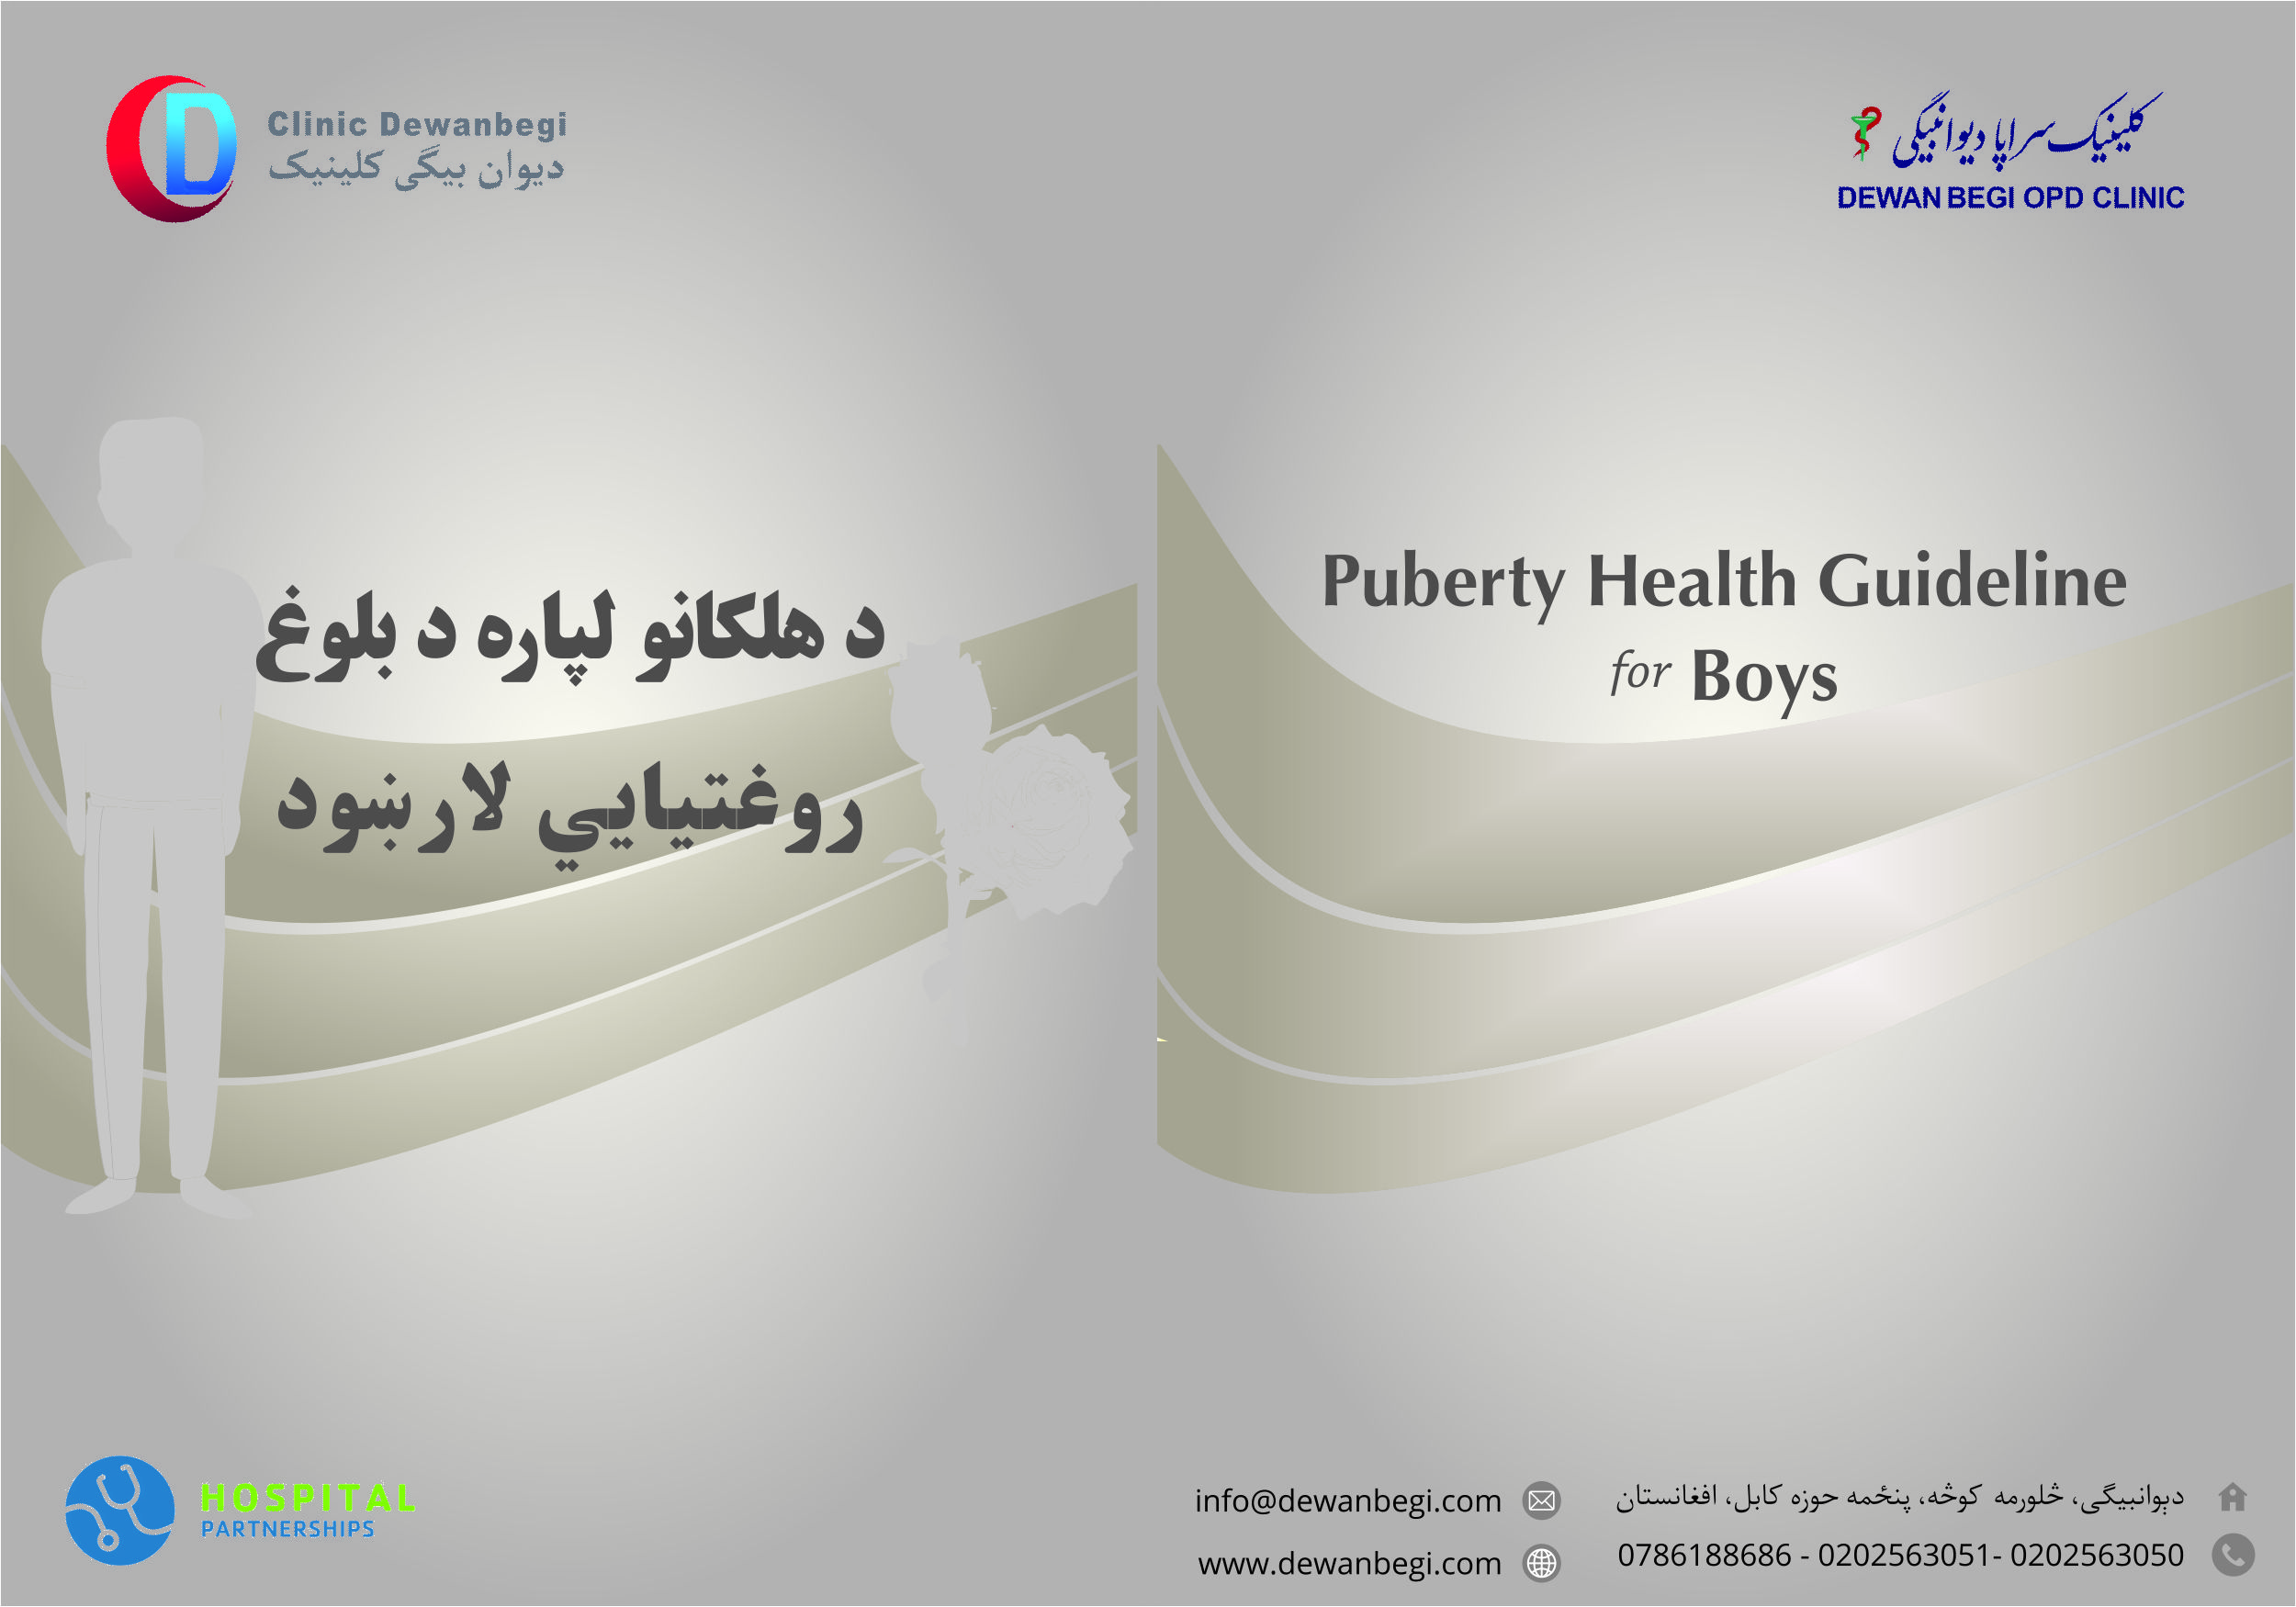 Puberty Health Guideline for Boys